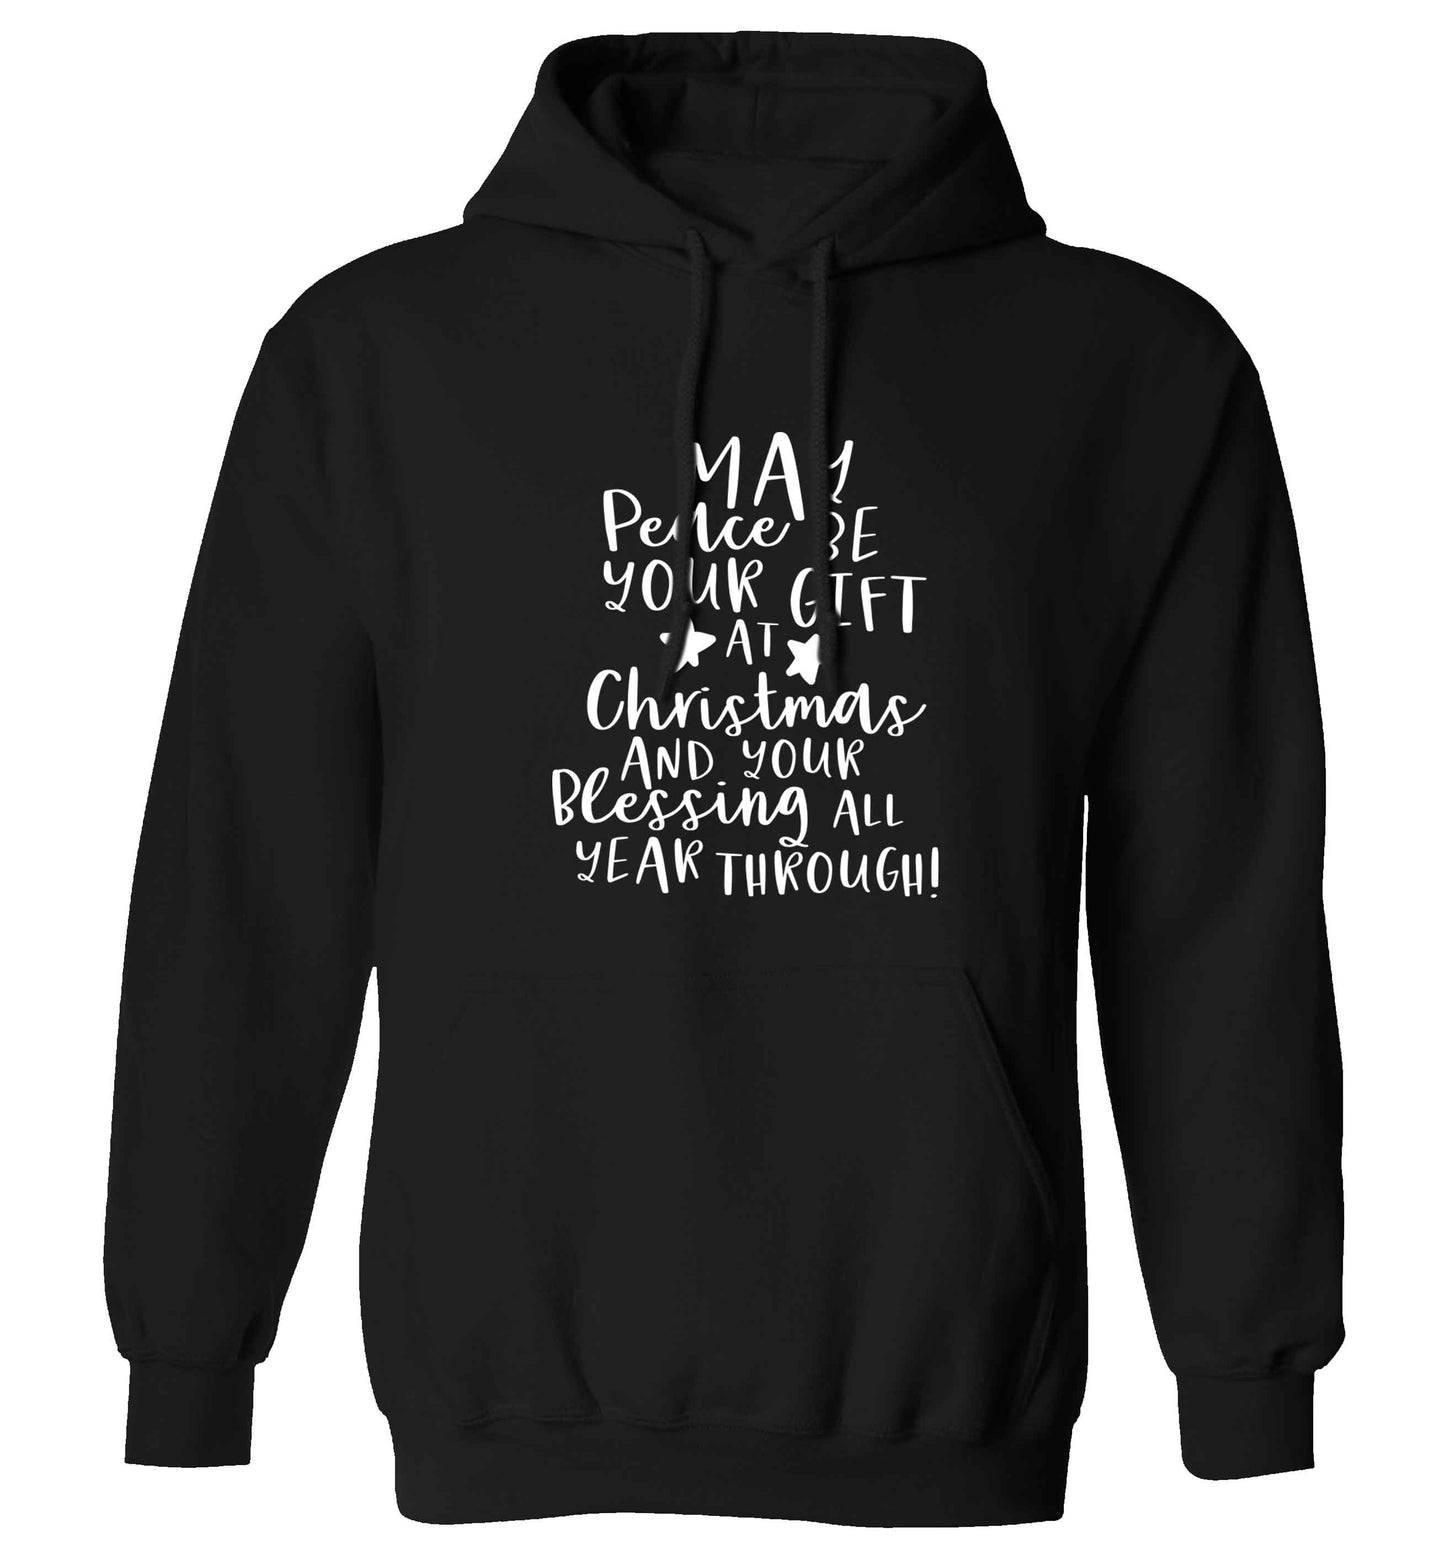 Peace be your Gift at Christmas Gift adults unisex black hoodie 2XL